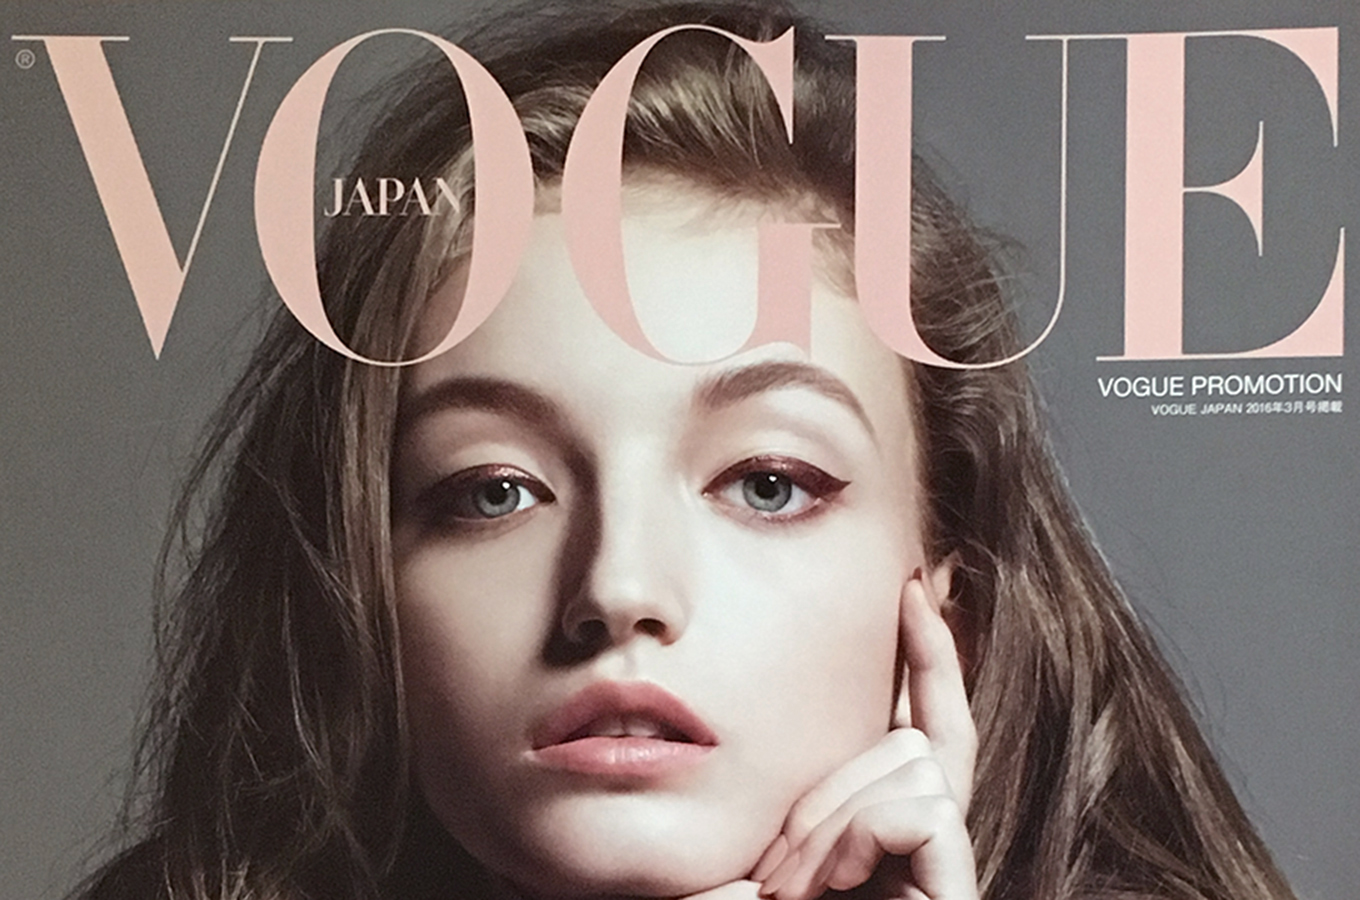 Beauty story for VOGUE Japan